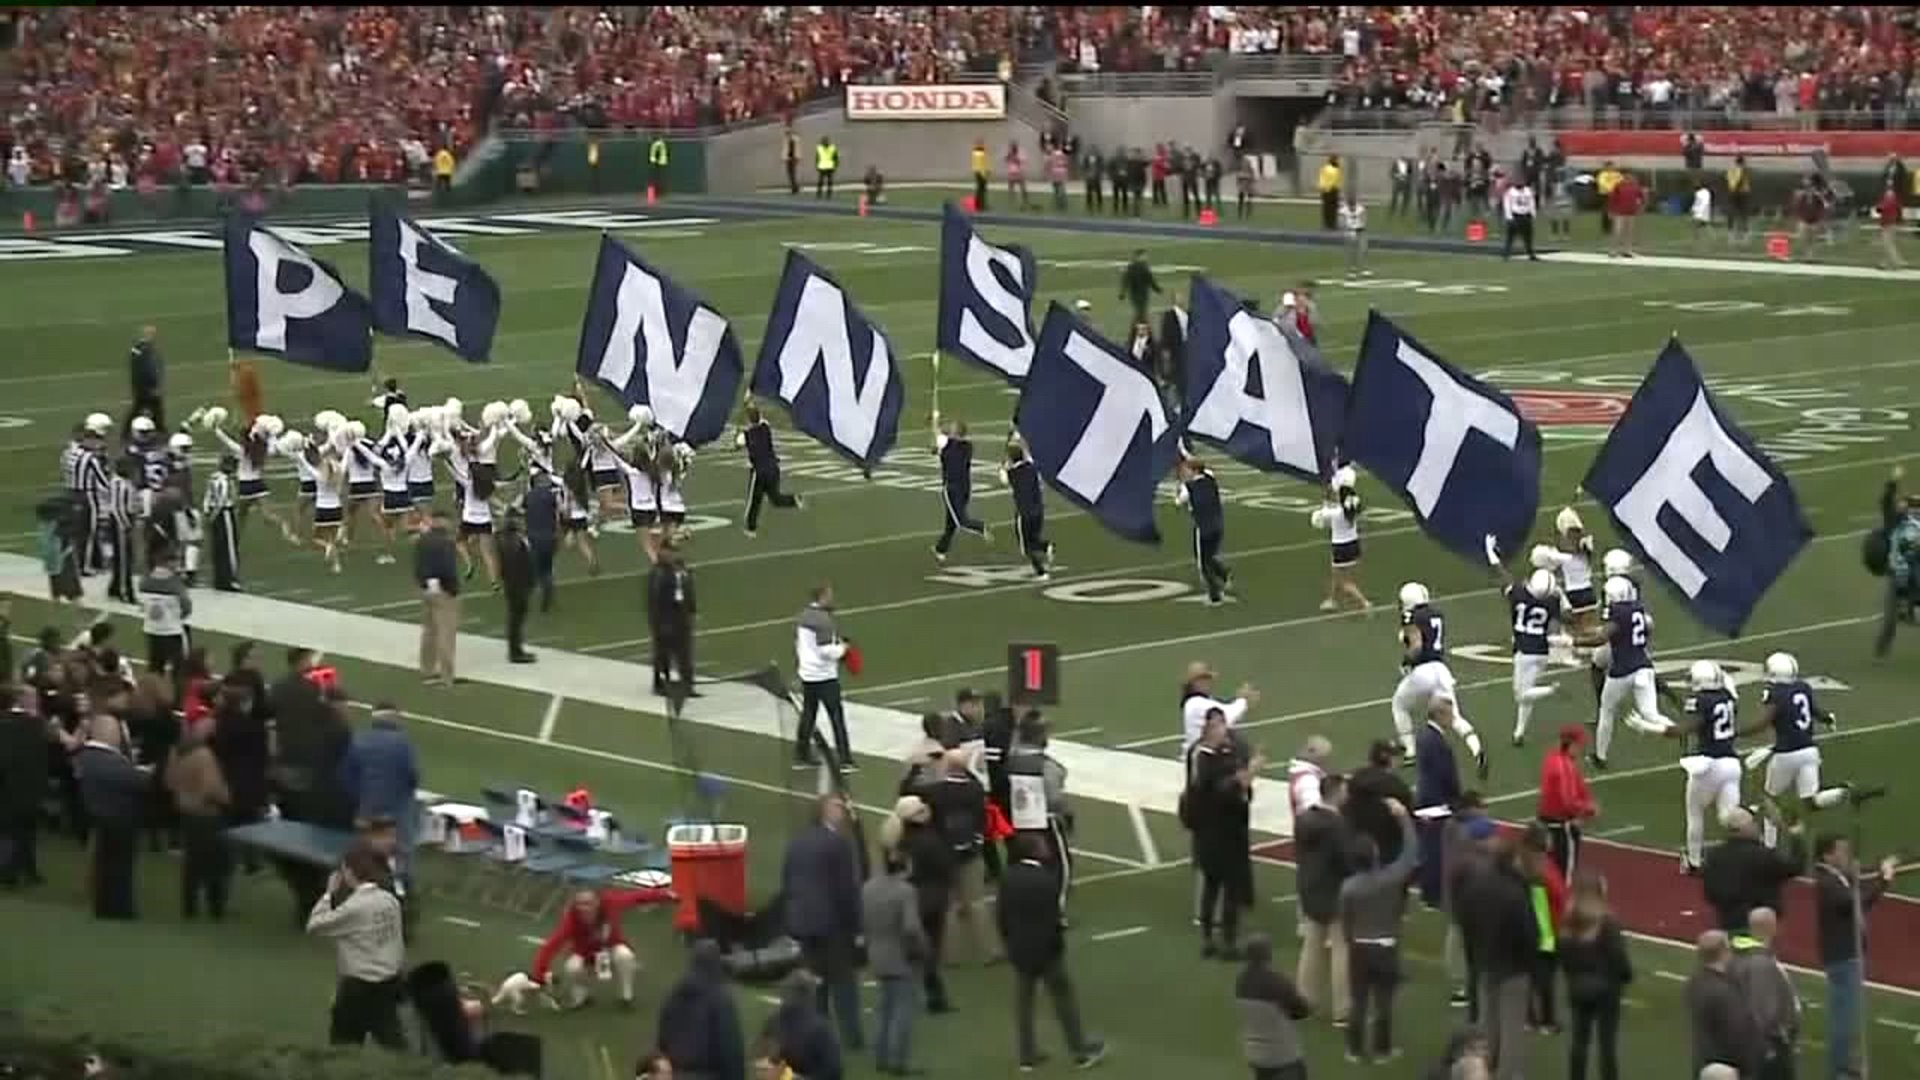 Nittany Lions Fans Plan Trips to Fiesta Bowl